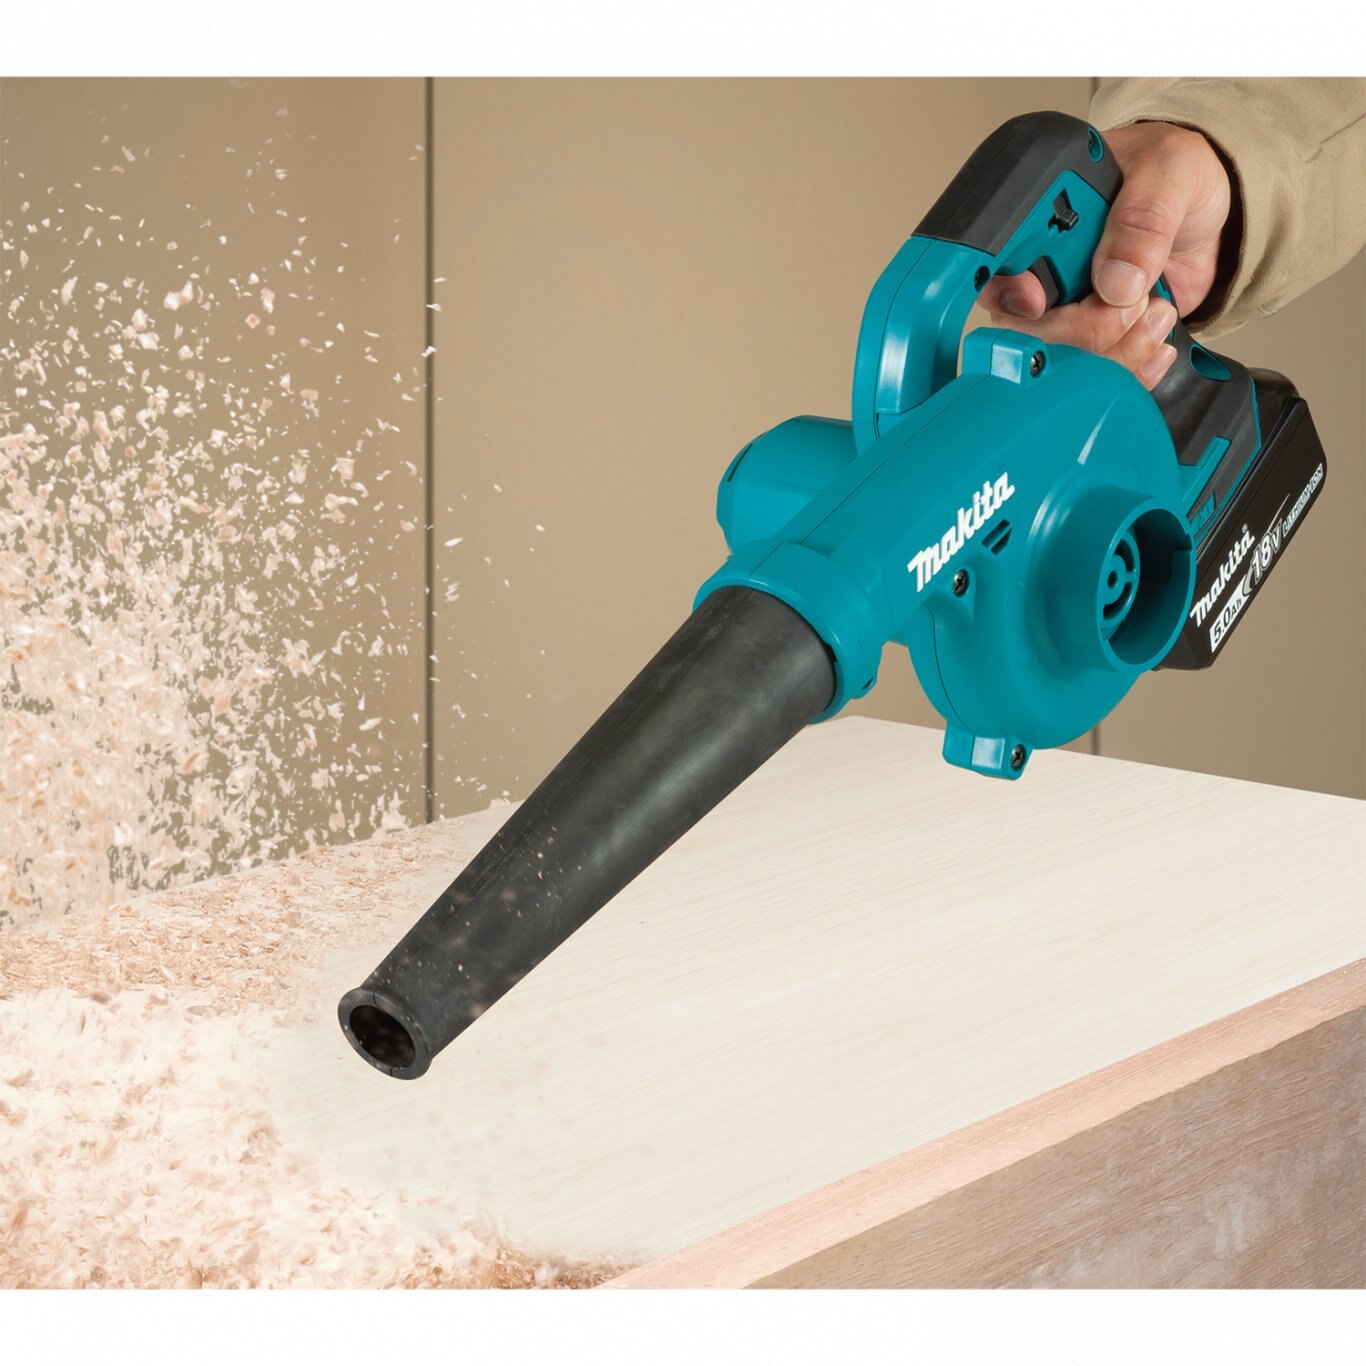 Makita 18V LXT® Lithium?Ion Cordless Blower, Tool Only